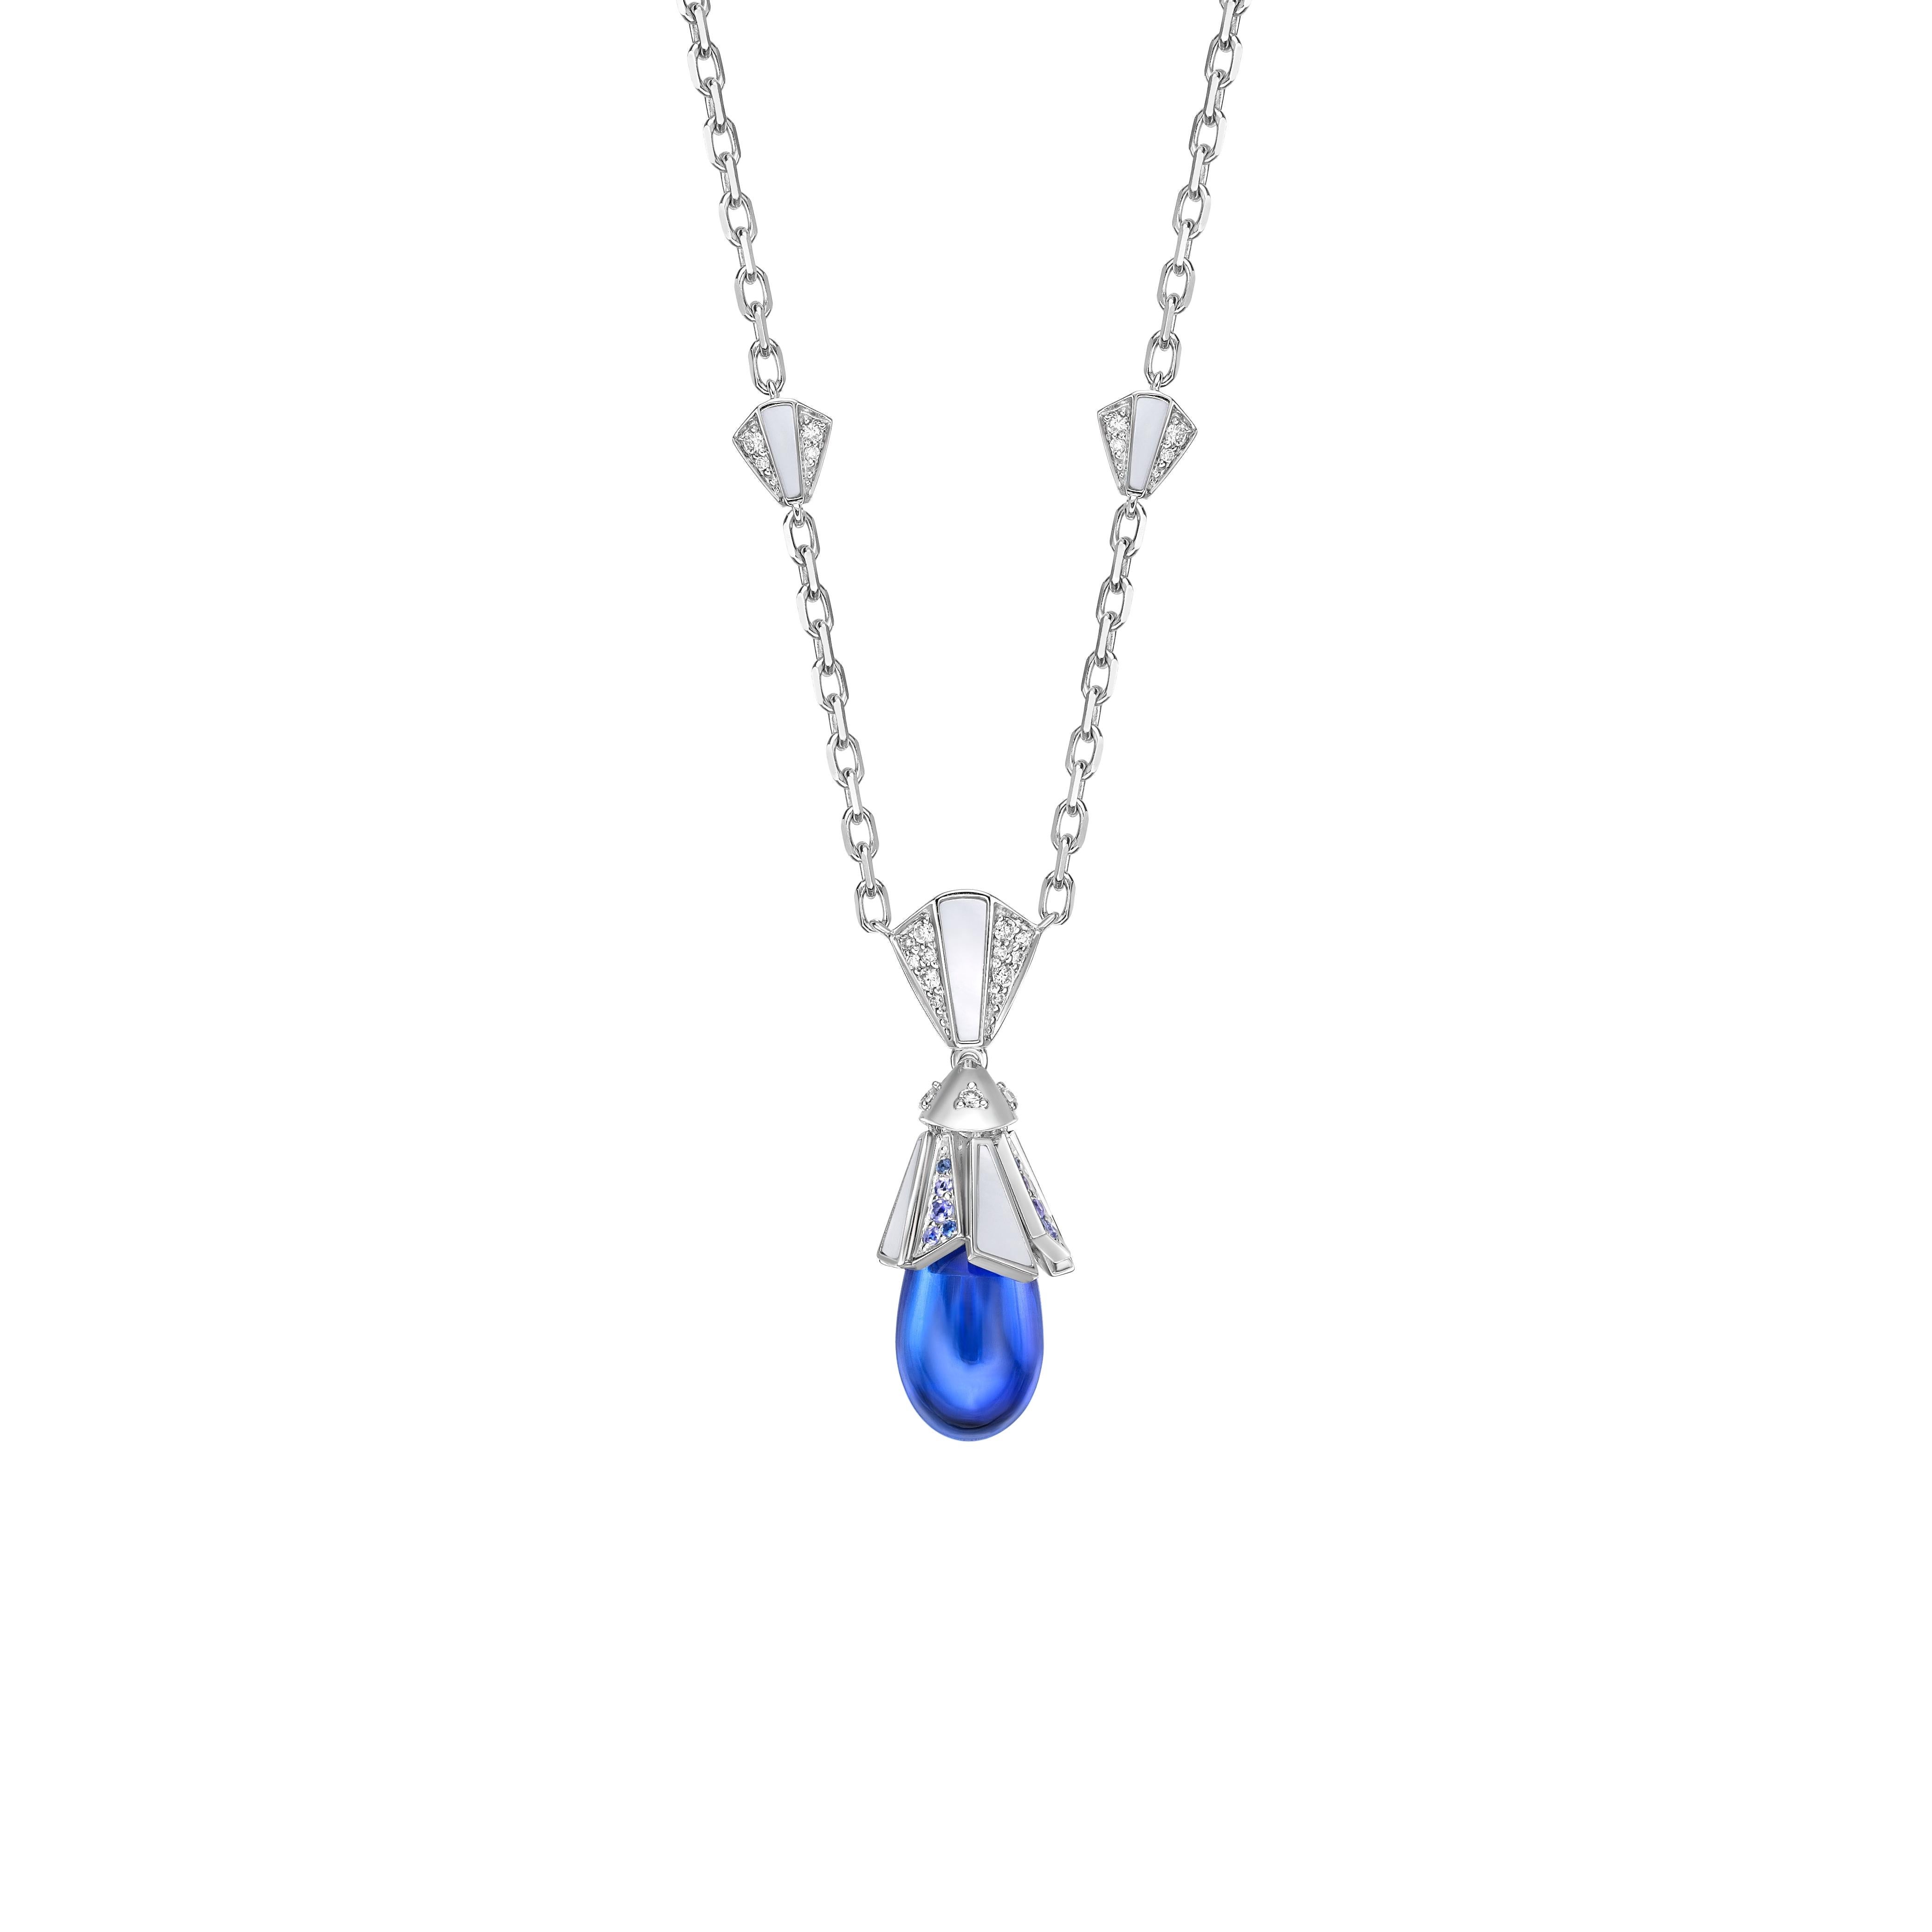 Contemporary 11.08 Carat Tanzanite Necklace in 18Karat White Gold with Multi stone. For Sale